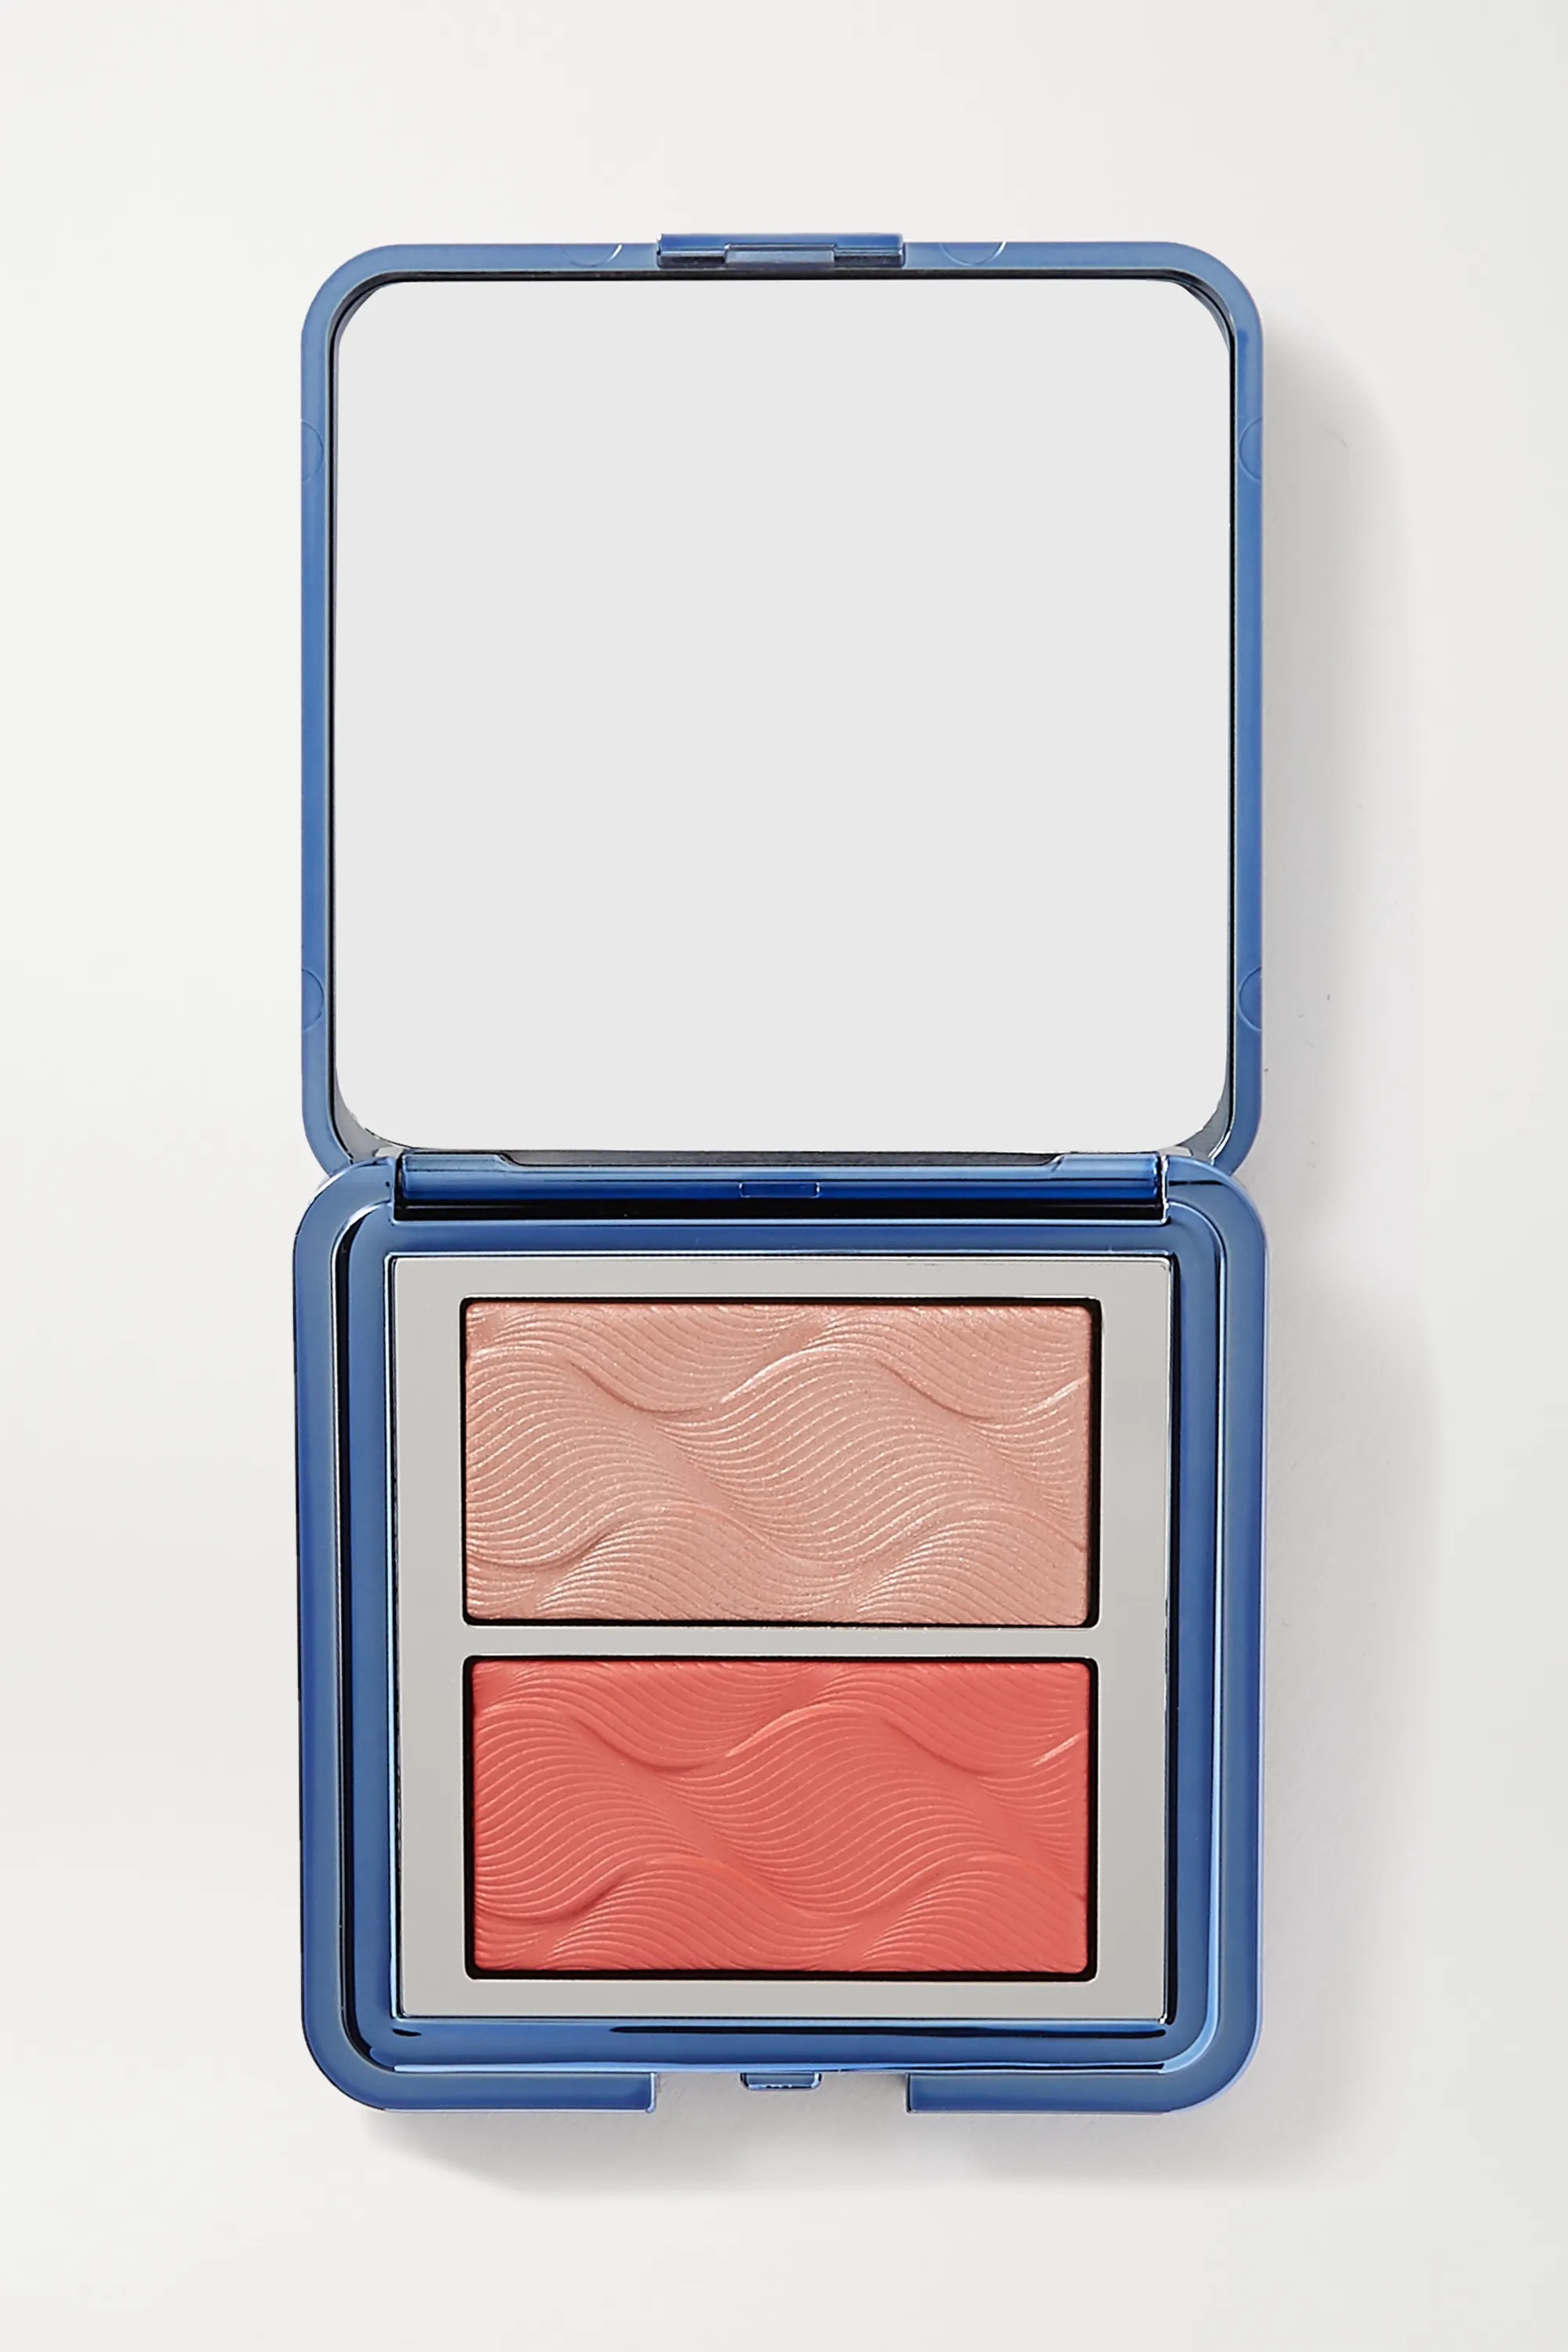 Pink Radiance Chic Cheek and Highlighter Duo - Coral Manta Ray | Chantecaille | NET-A-PORTER香缇卡